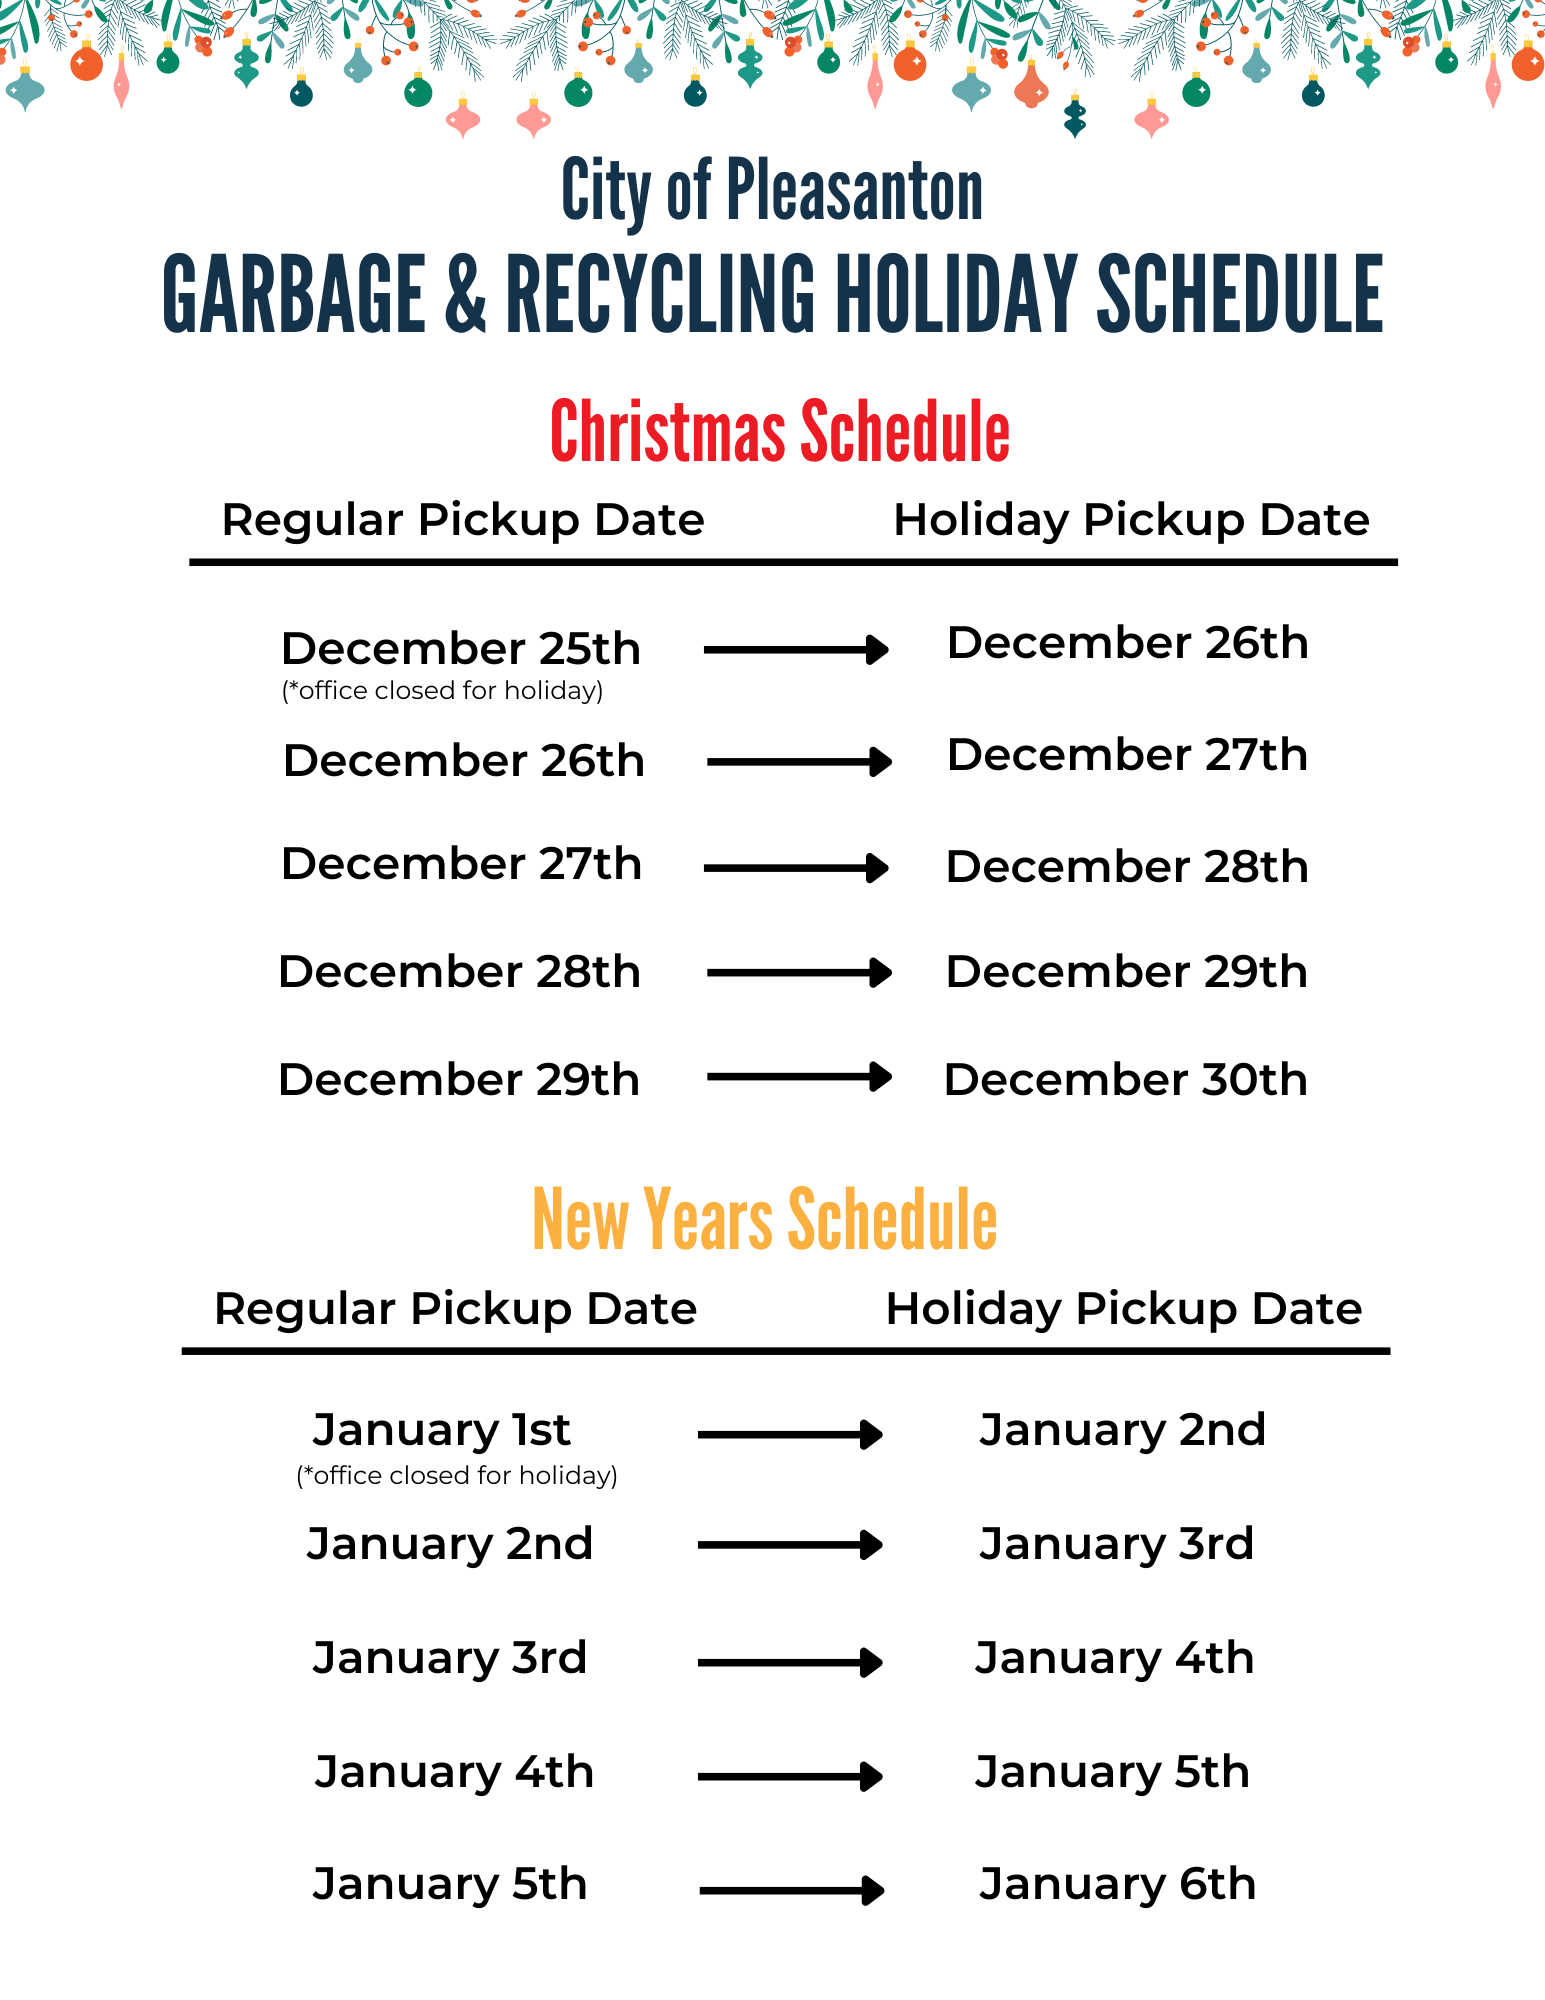 GARBAGE & RECYCLING HOLIDAY SCHEDULE 